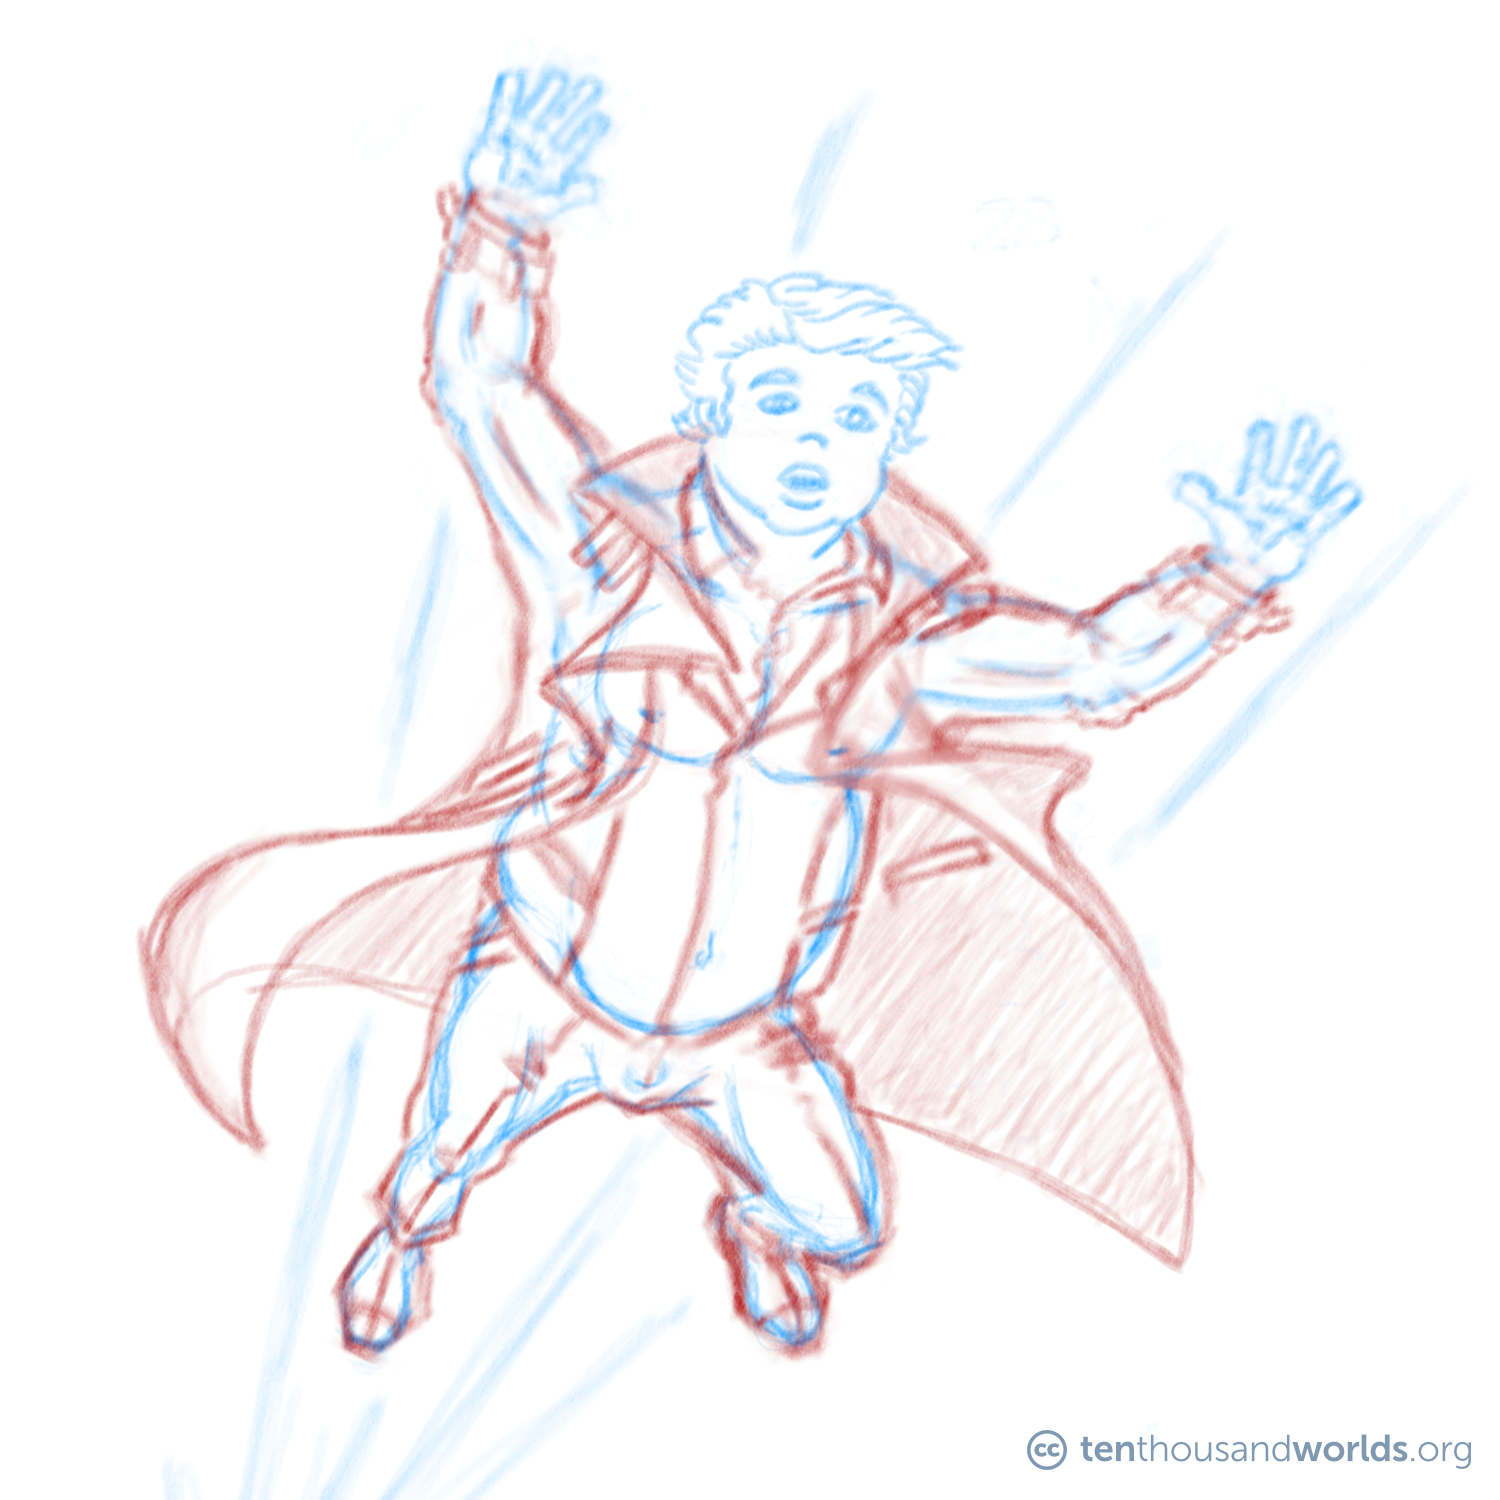 A pair of overlapping pencil sketches of a chubby man wearing a large flapping coat while flying through the air.